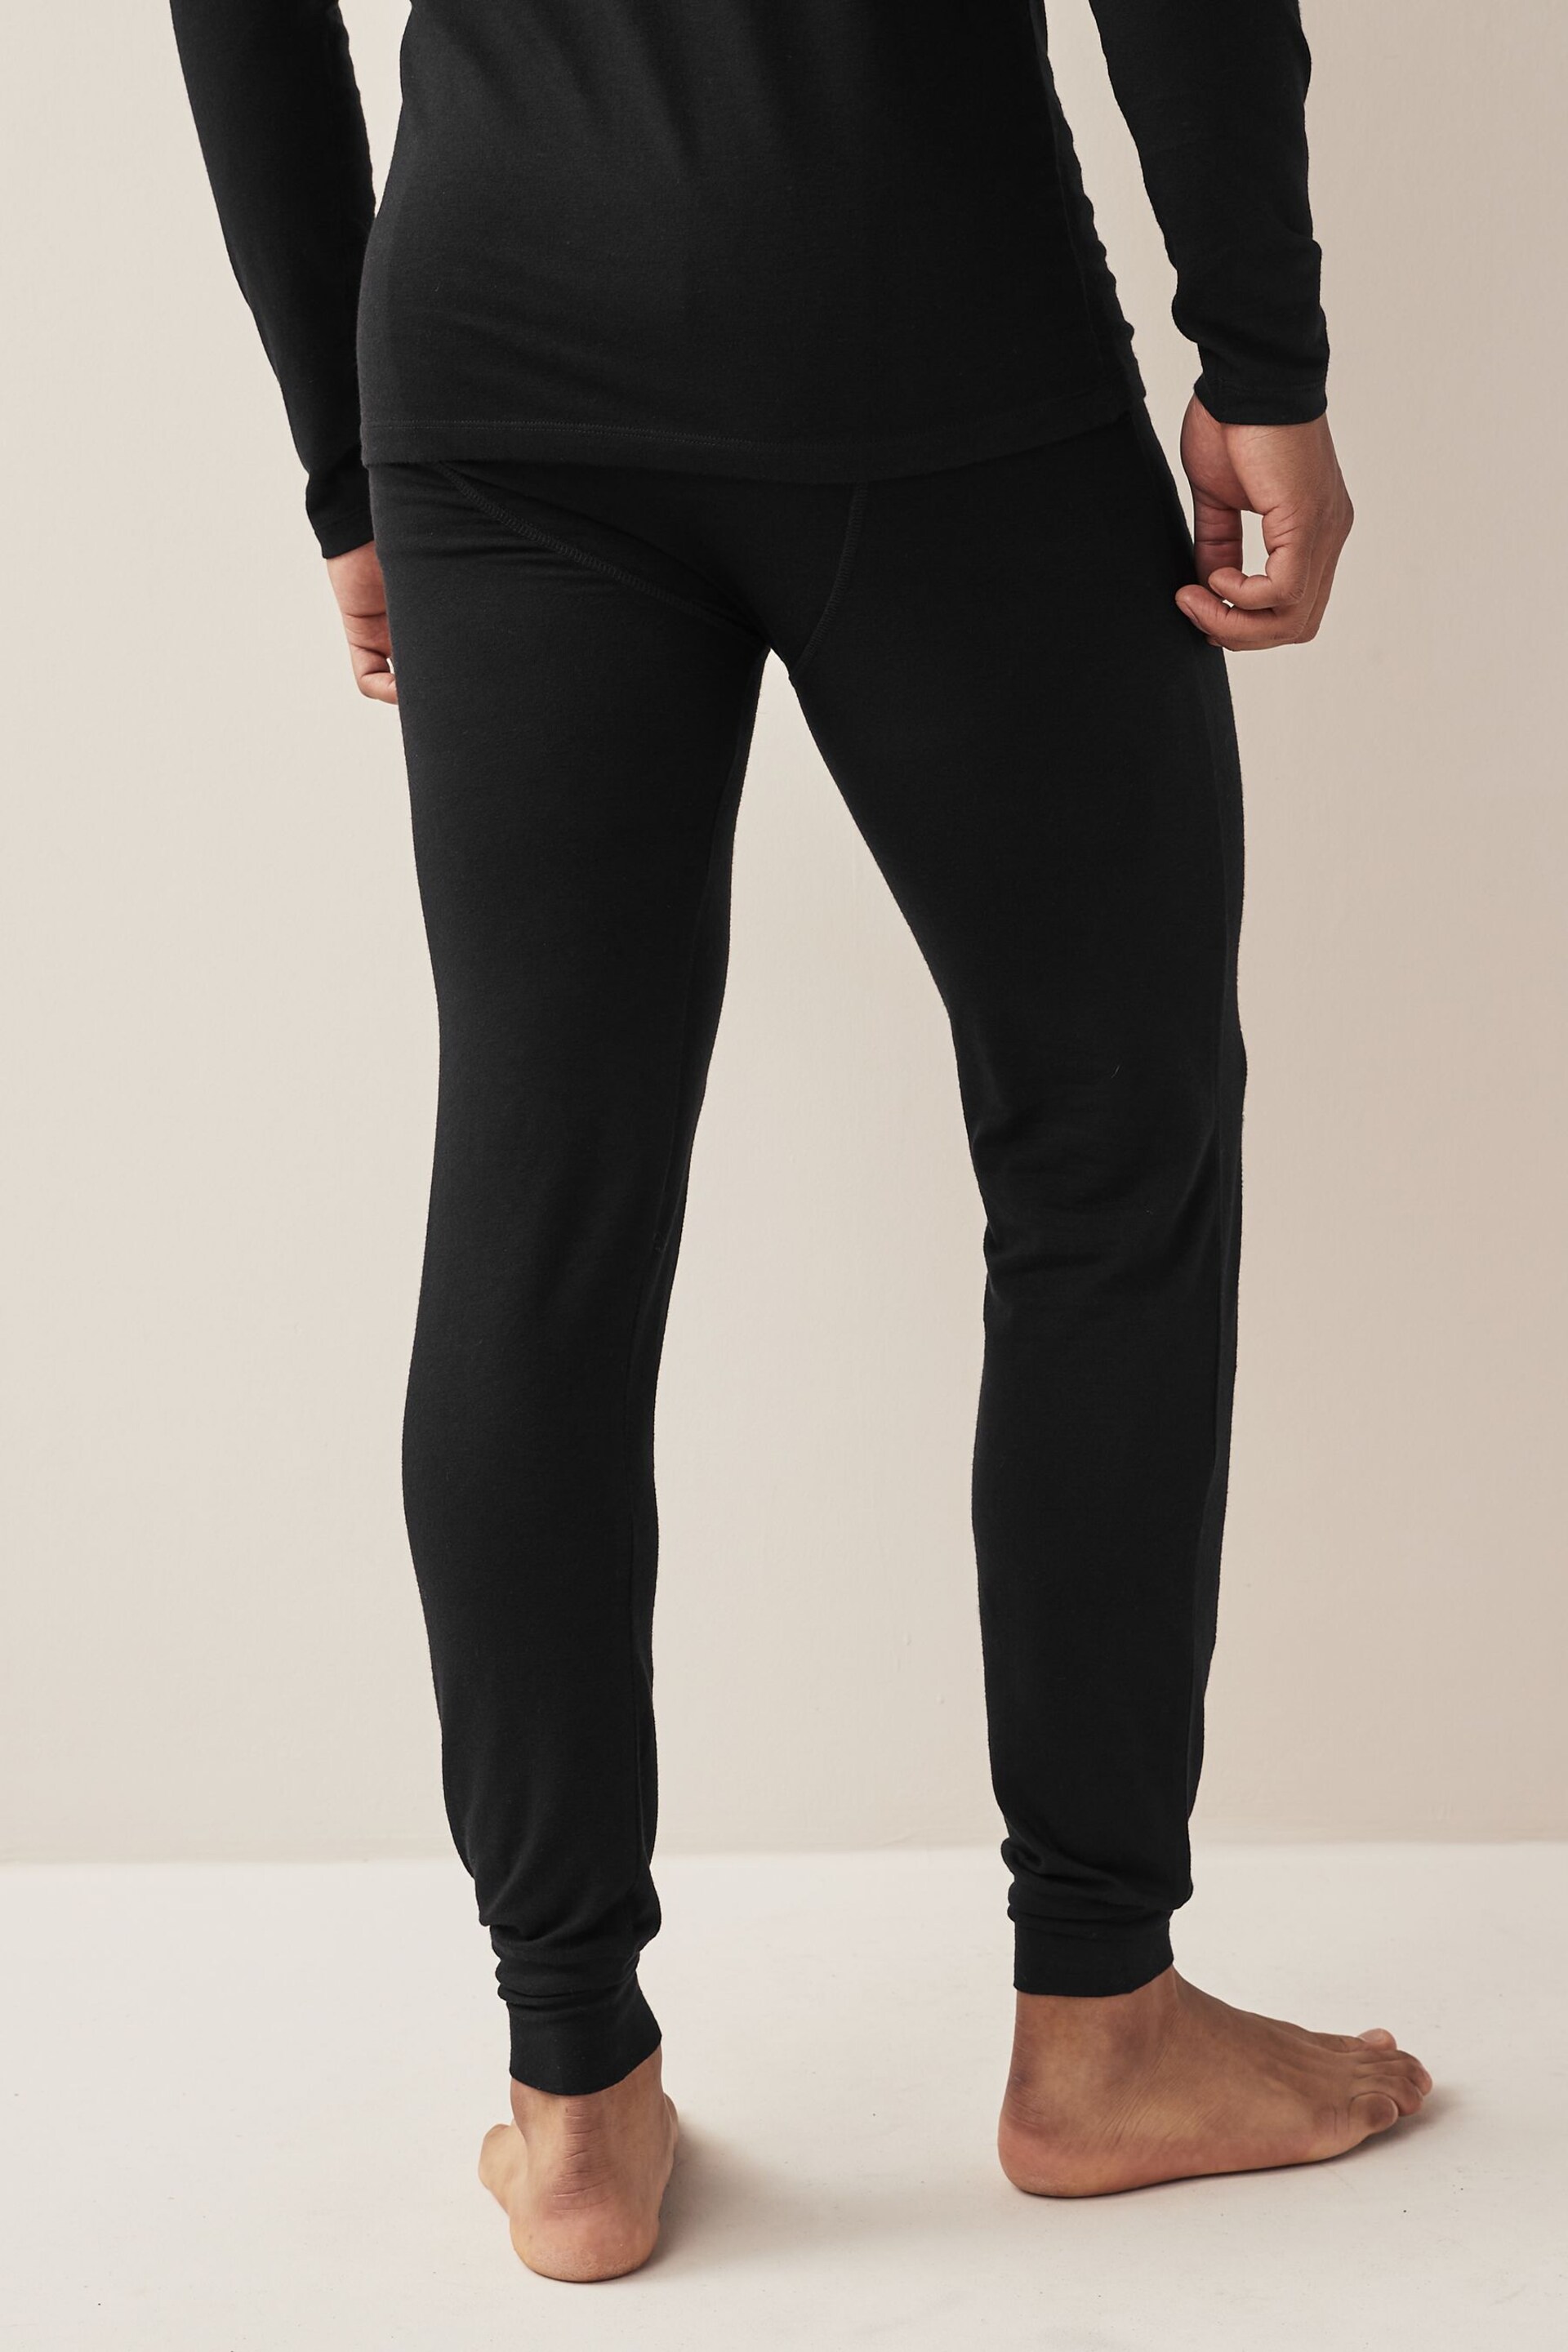 Black 2 Pack Lightweight Thermal Long Johns - Image 5 of 8